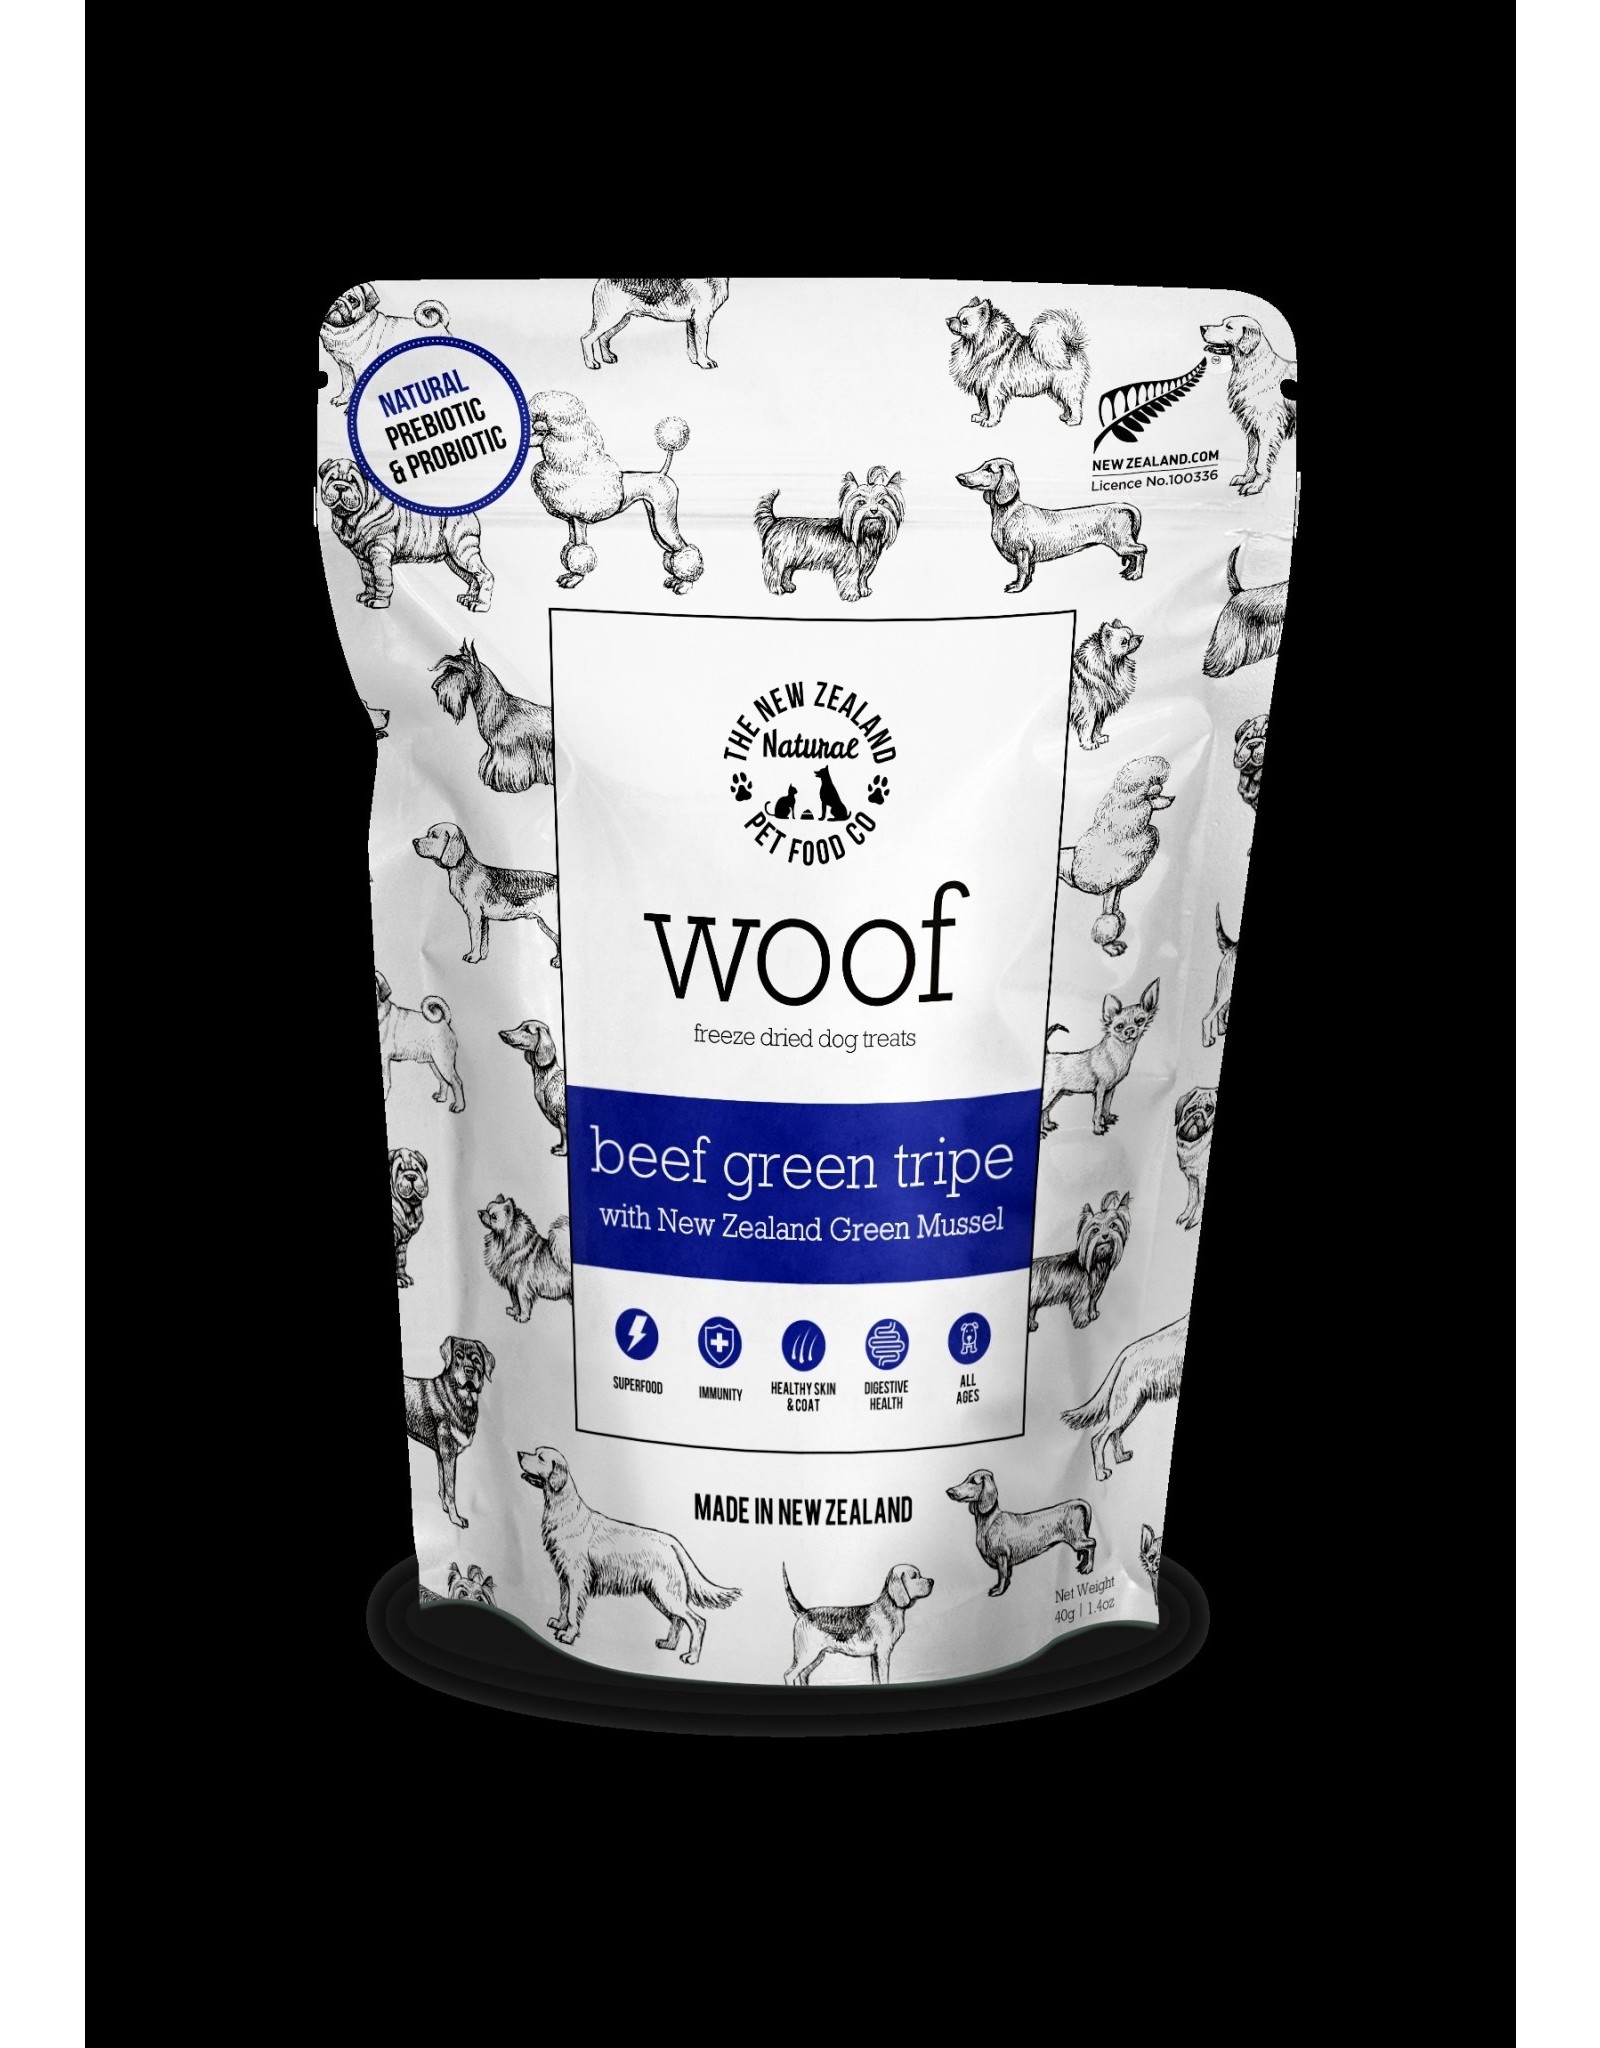 THE NEW ZEALAND NATURAL PETFOOD CO- WOOF WOOF DOG FREEZE DRIED BEEF & TRIPE TREAT 1.76OZ